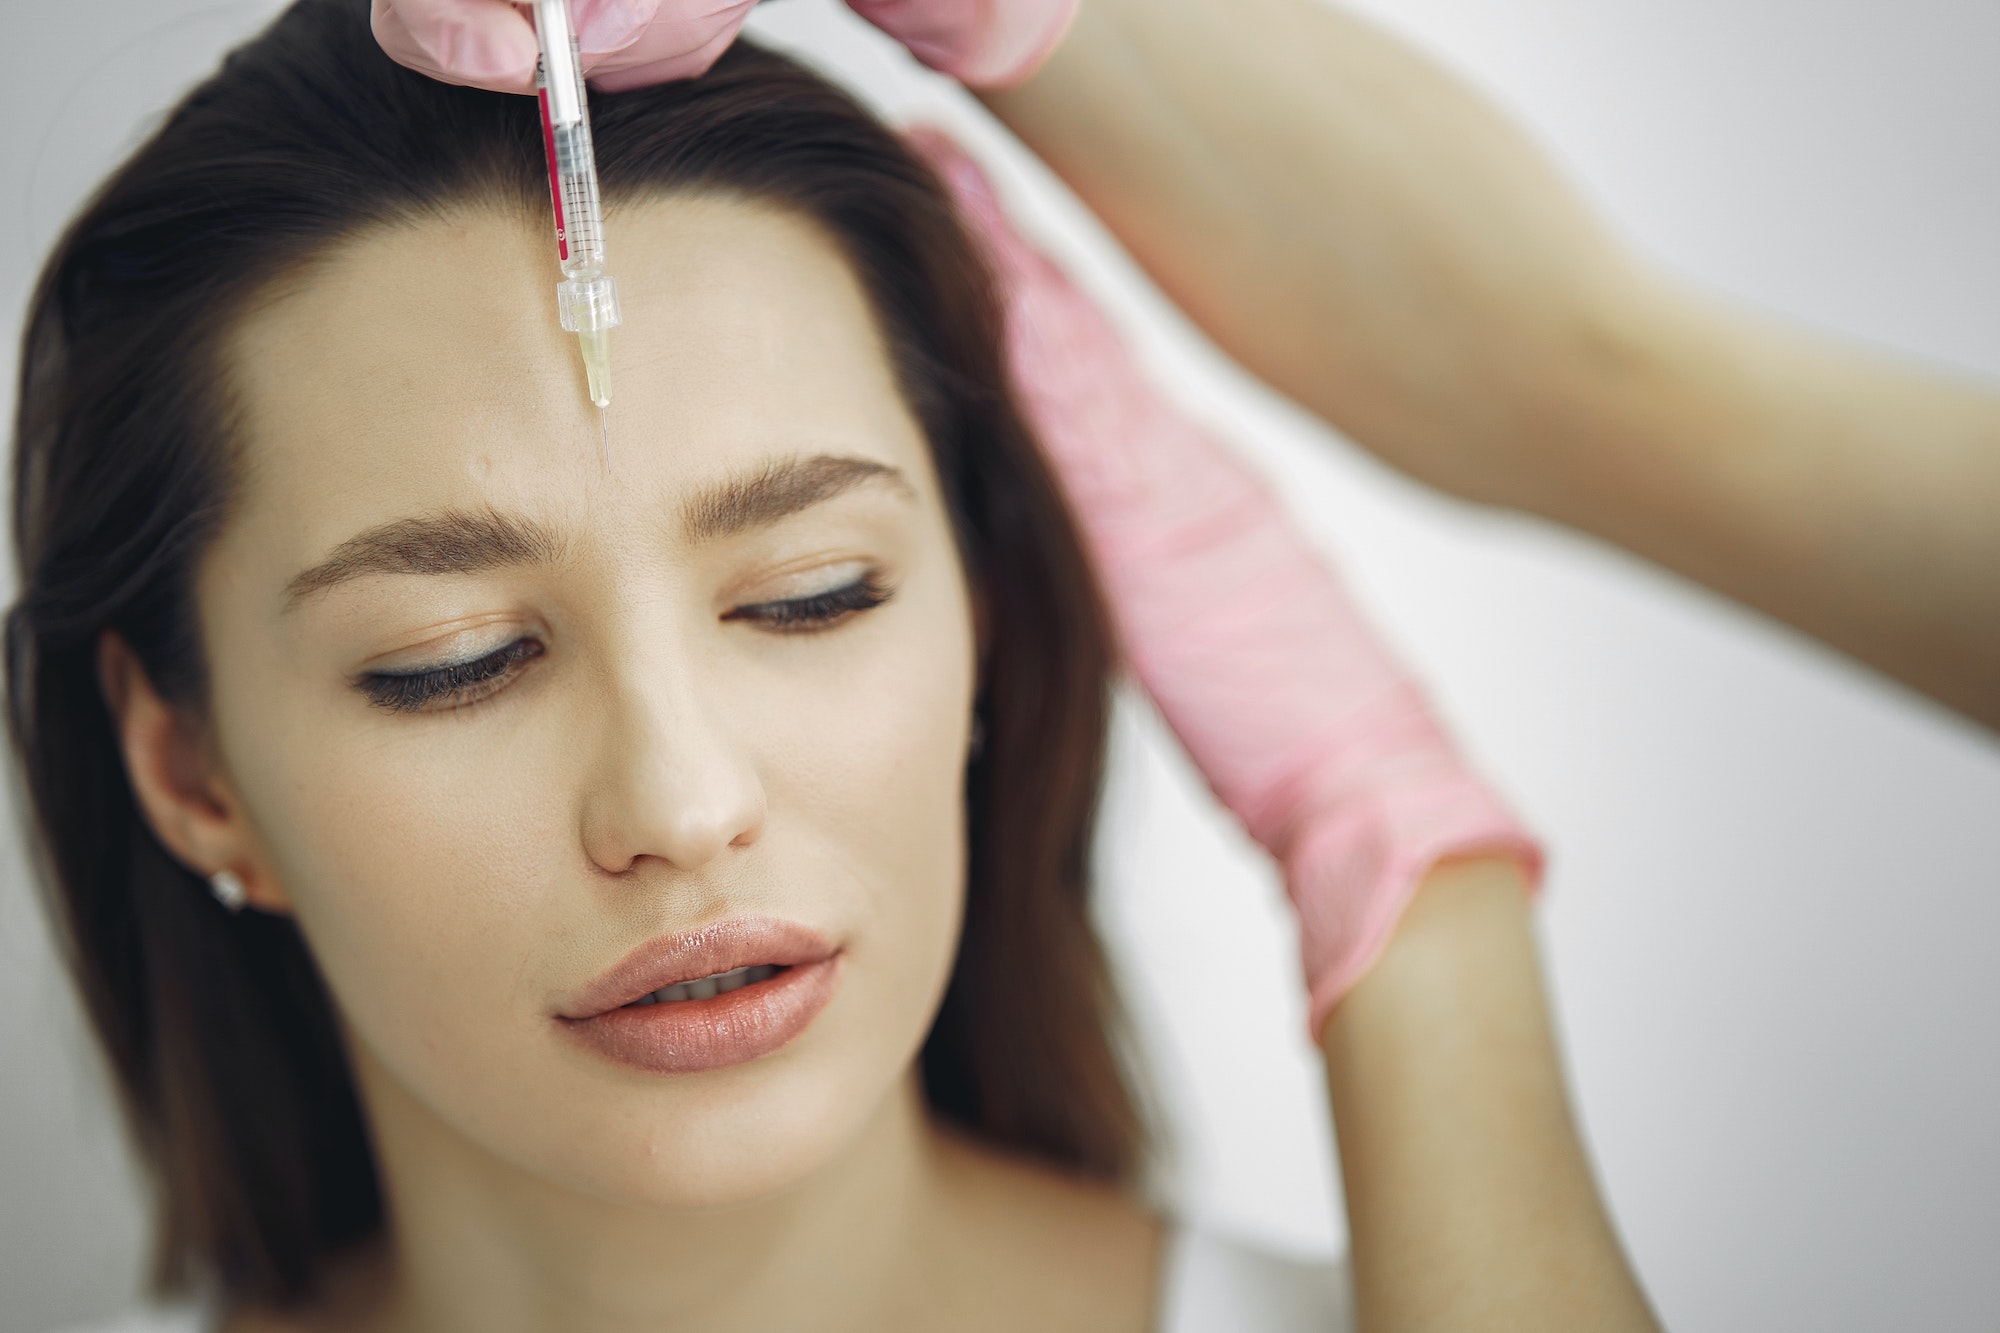 Popular Aesthetic Treatments | Things you should know about getting botox in Las Vegas | Beauty | Elle Blonde Luxury Lifestyle Destination Blog